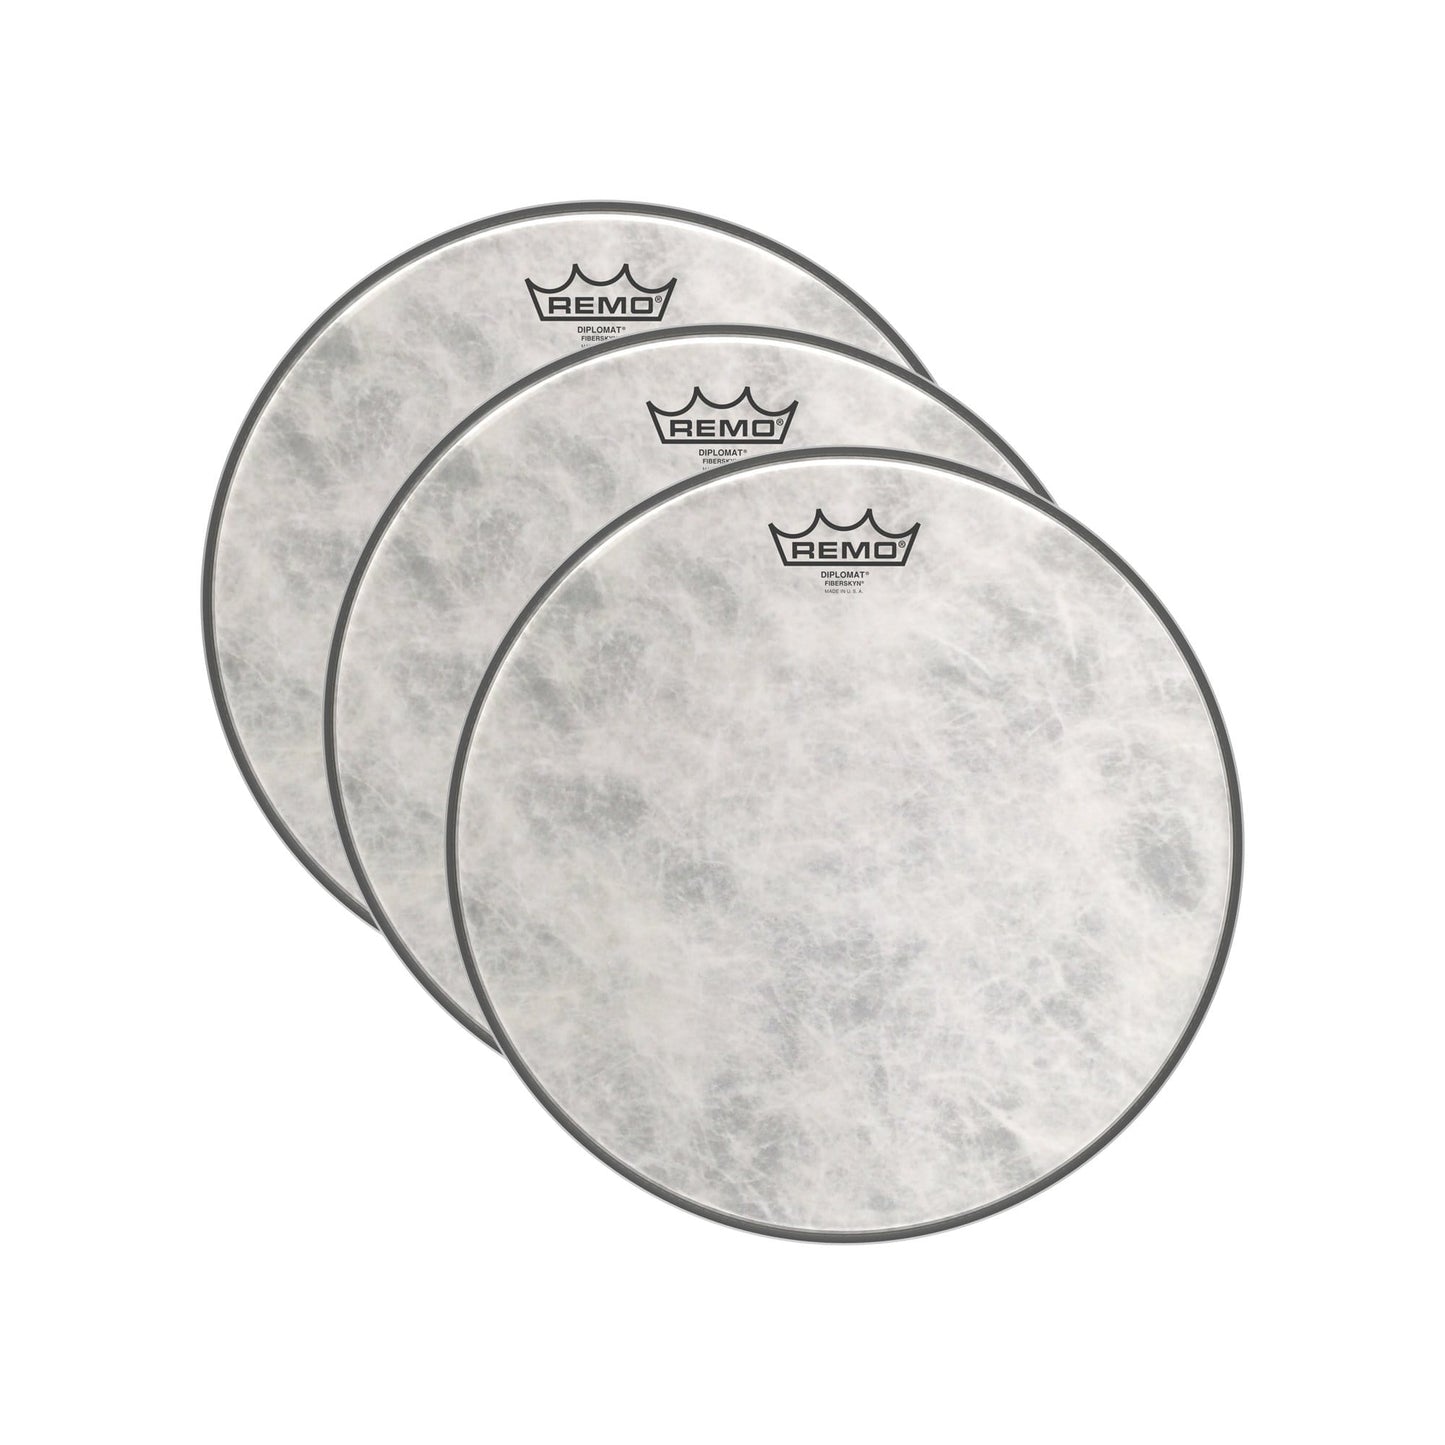 Remo 13" Diplomat Fiberskyn Drumhead (3 Pack) Drums and Percussion / Parts and Accessories / Heads